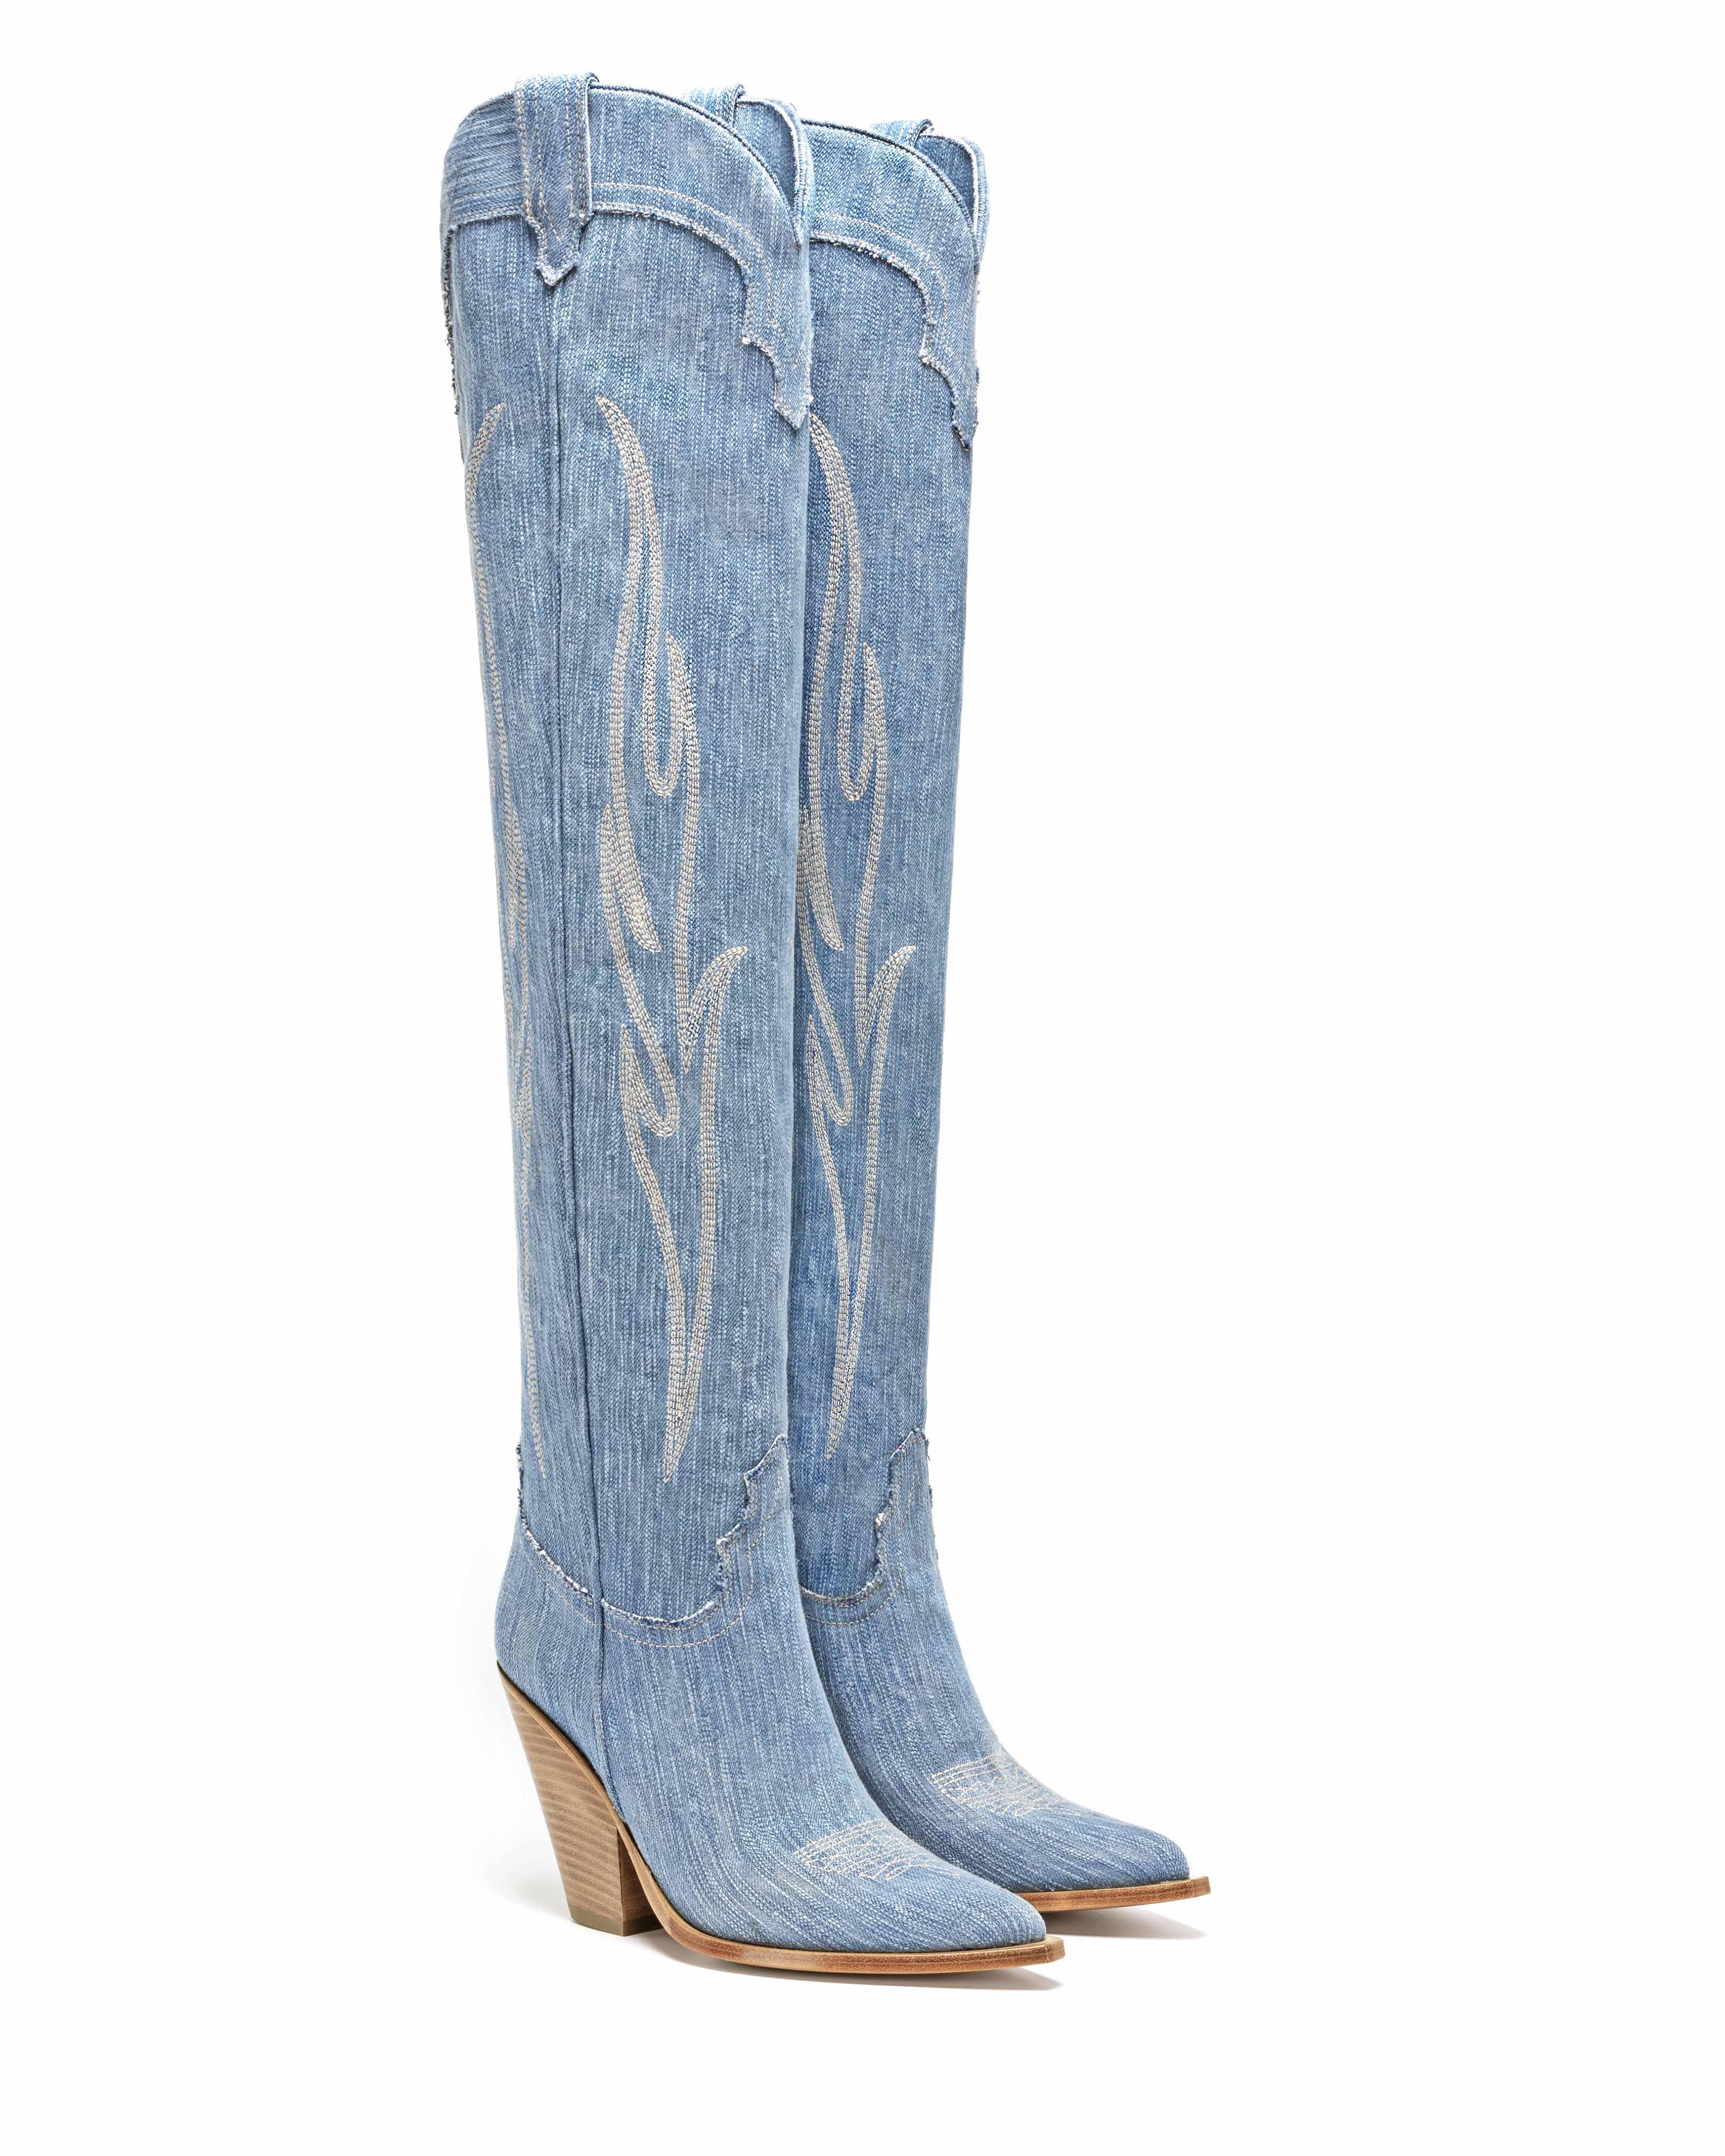 HERMOSA Women's Over The Knee Boots in Light Blue Jeans | Off-White Embroidery_Front_02